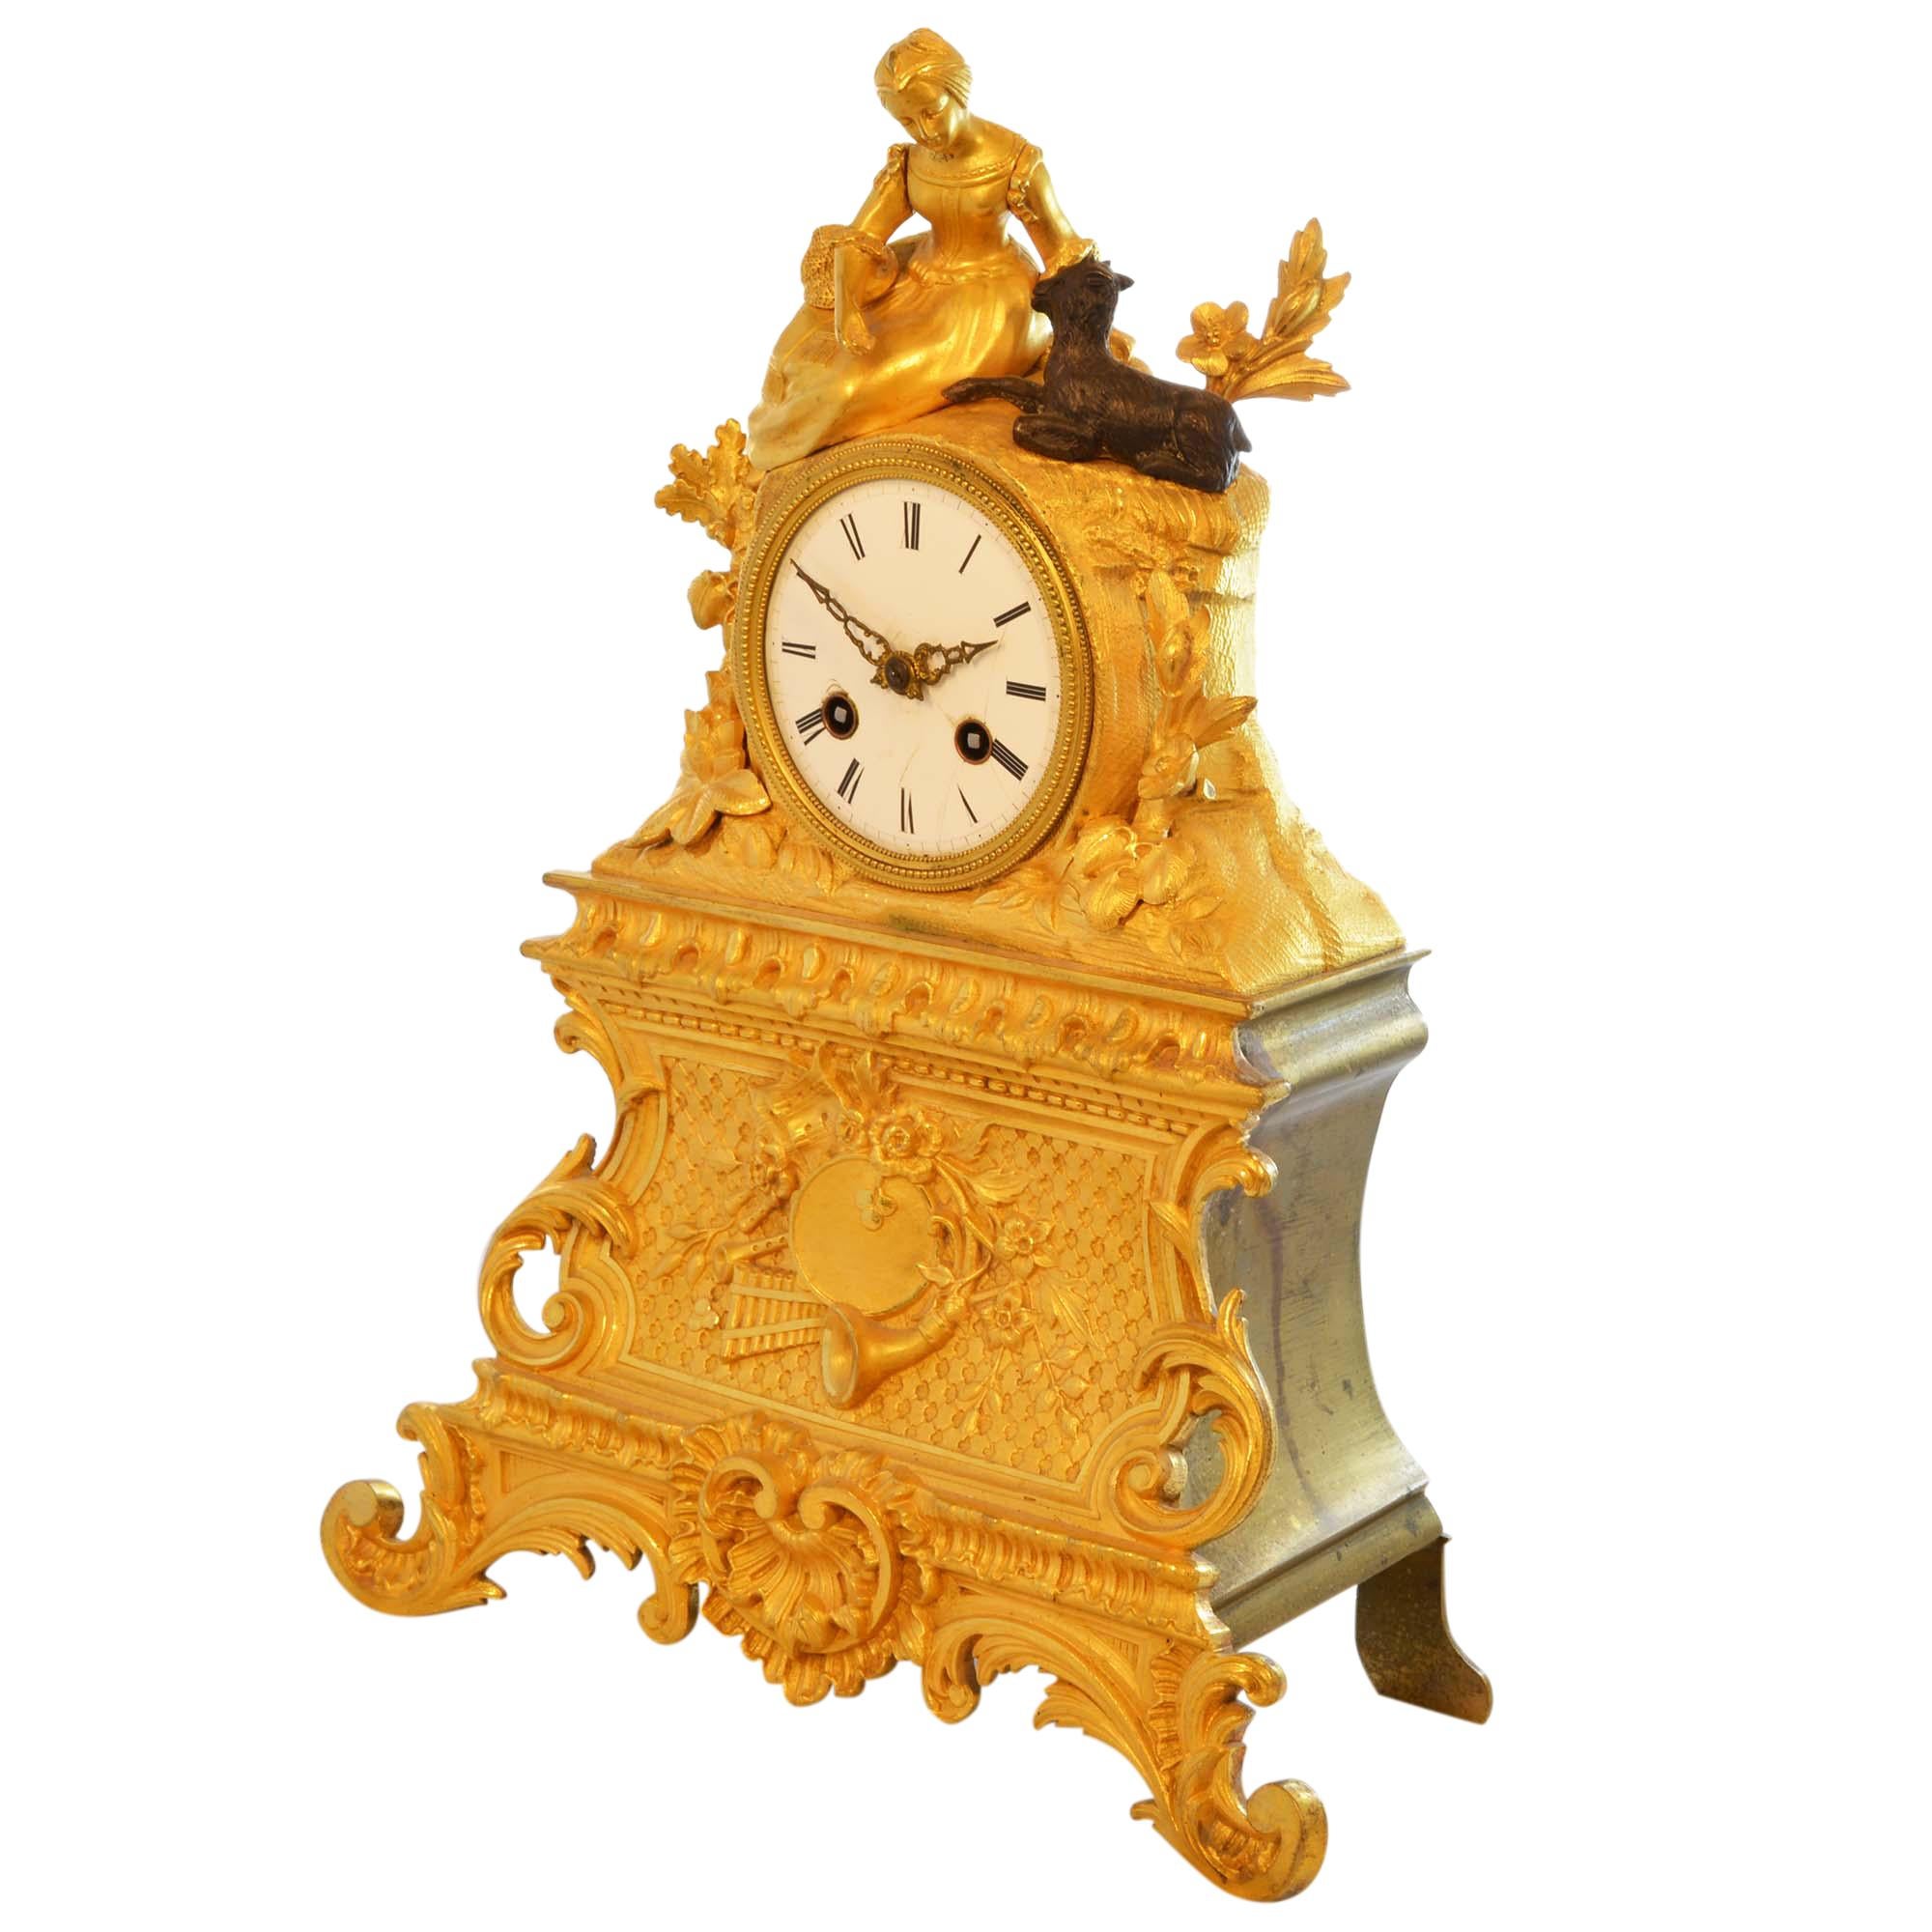 Napoleon III Antique 19th Century Gilded Mantle Desk Clock with Girl and Goat For Sale